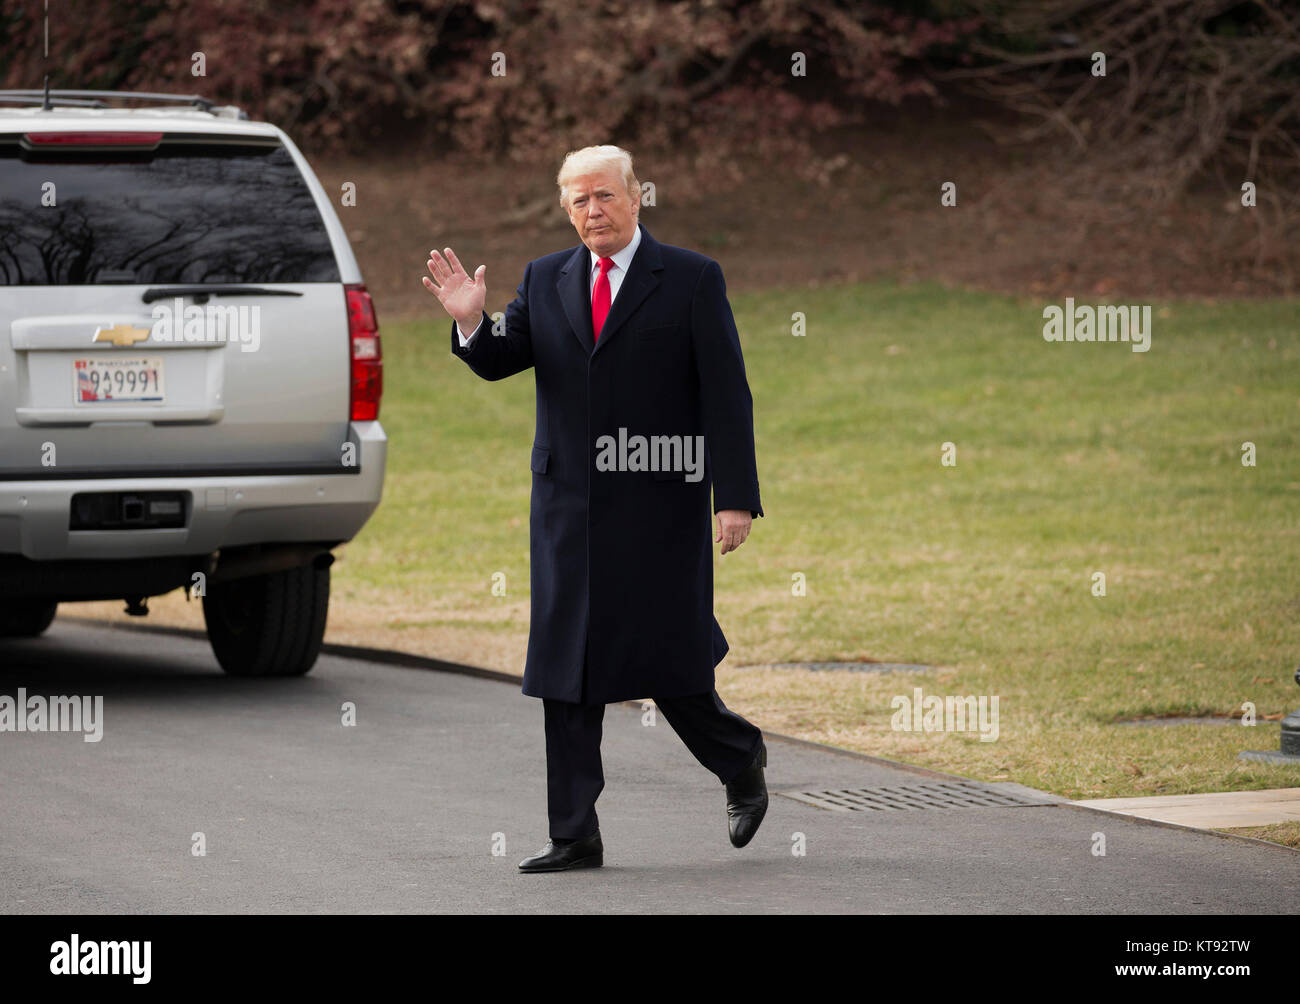 U.S. President Donald J. Trump departs the White House in Washington, DC, December 22, 2017 en route Mar-a-Lago in Palm Beach FL for his Christmas break after signing tax overhaul and budget bills. Credit: Chris Kleponis/CNP - NO WIRE SERVICE - Photo: Chris Kleponis/Consolidated/dpa Stock Photo